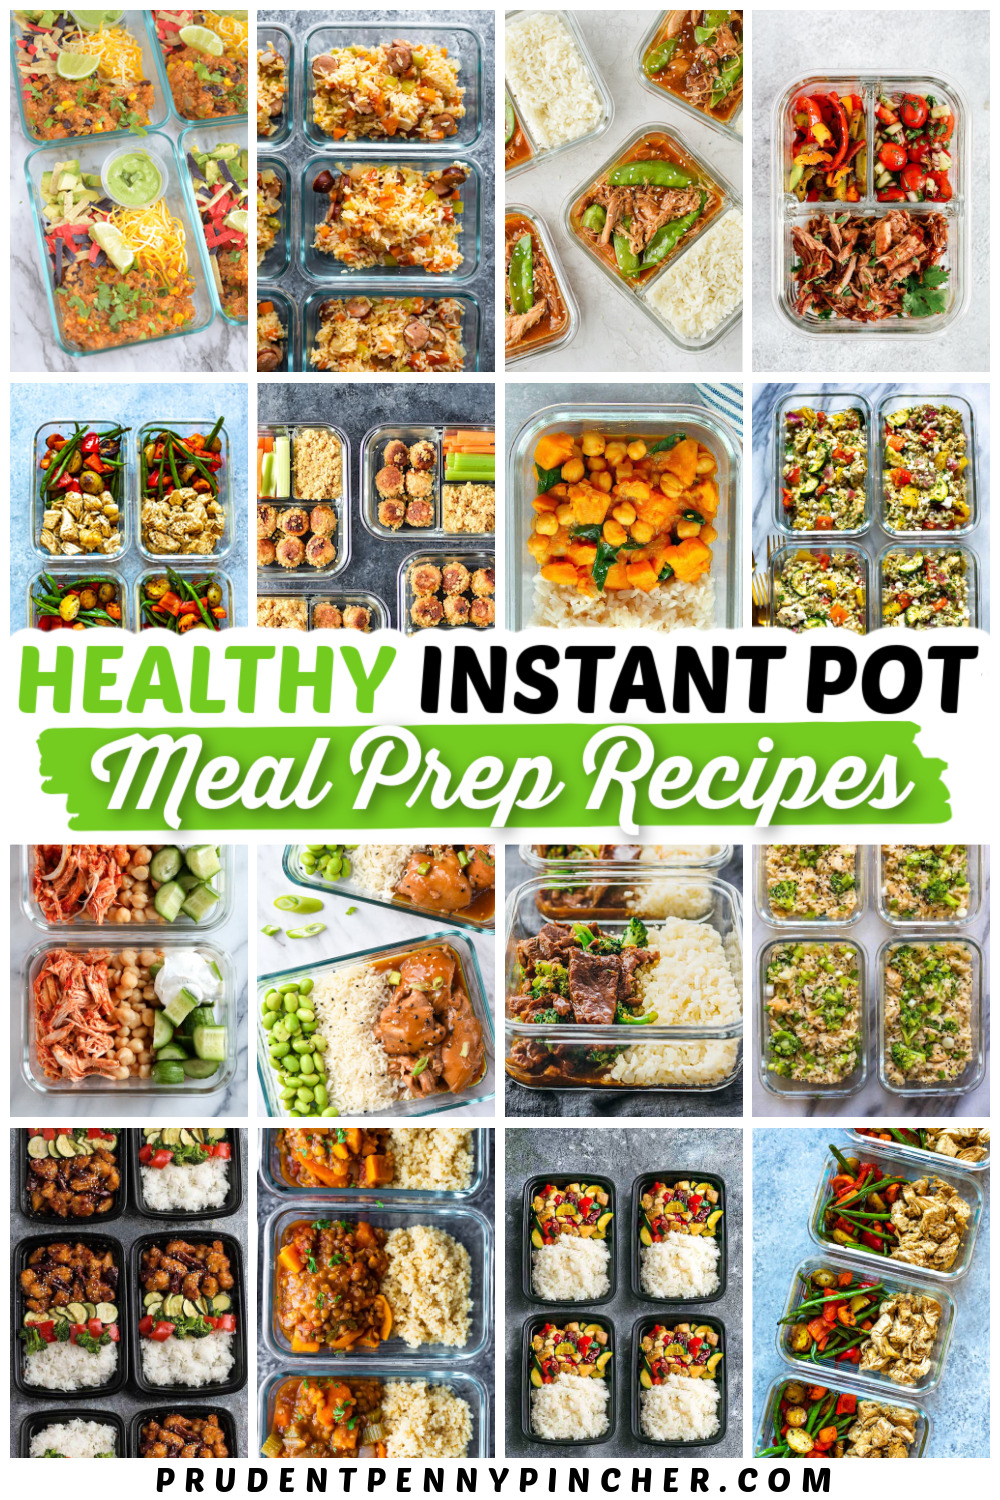 5 Meal Prep Strategies That Work! - Sweet Peas and Saffron